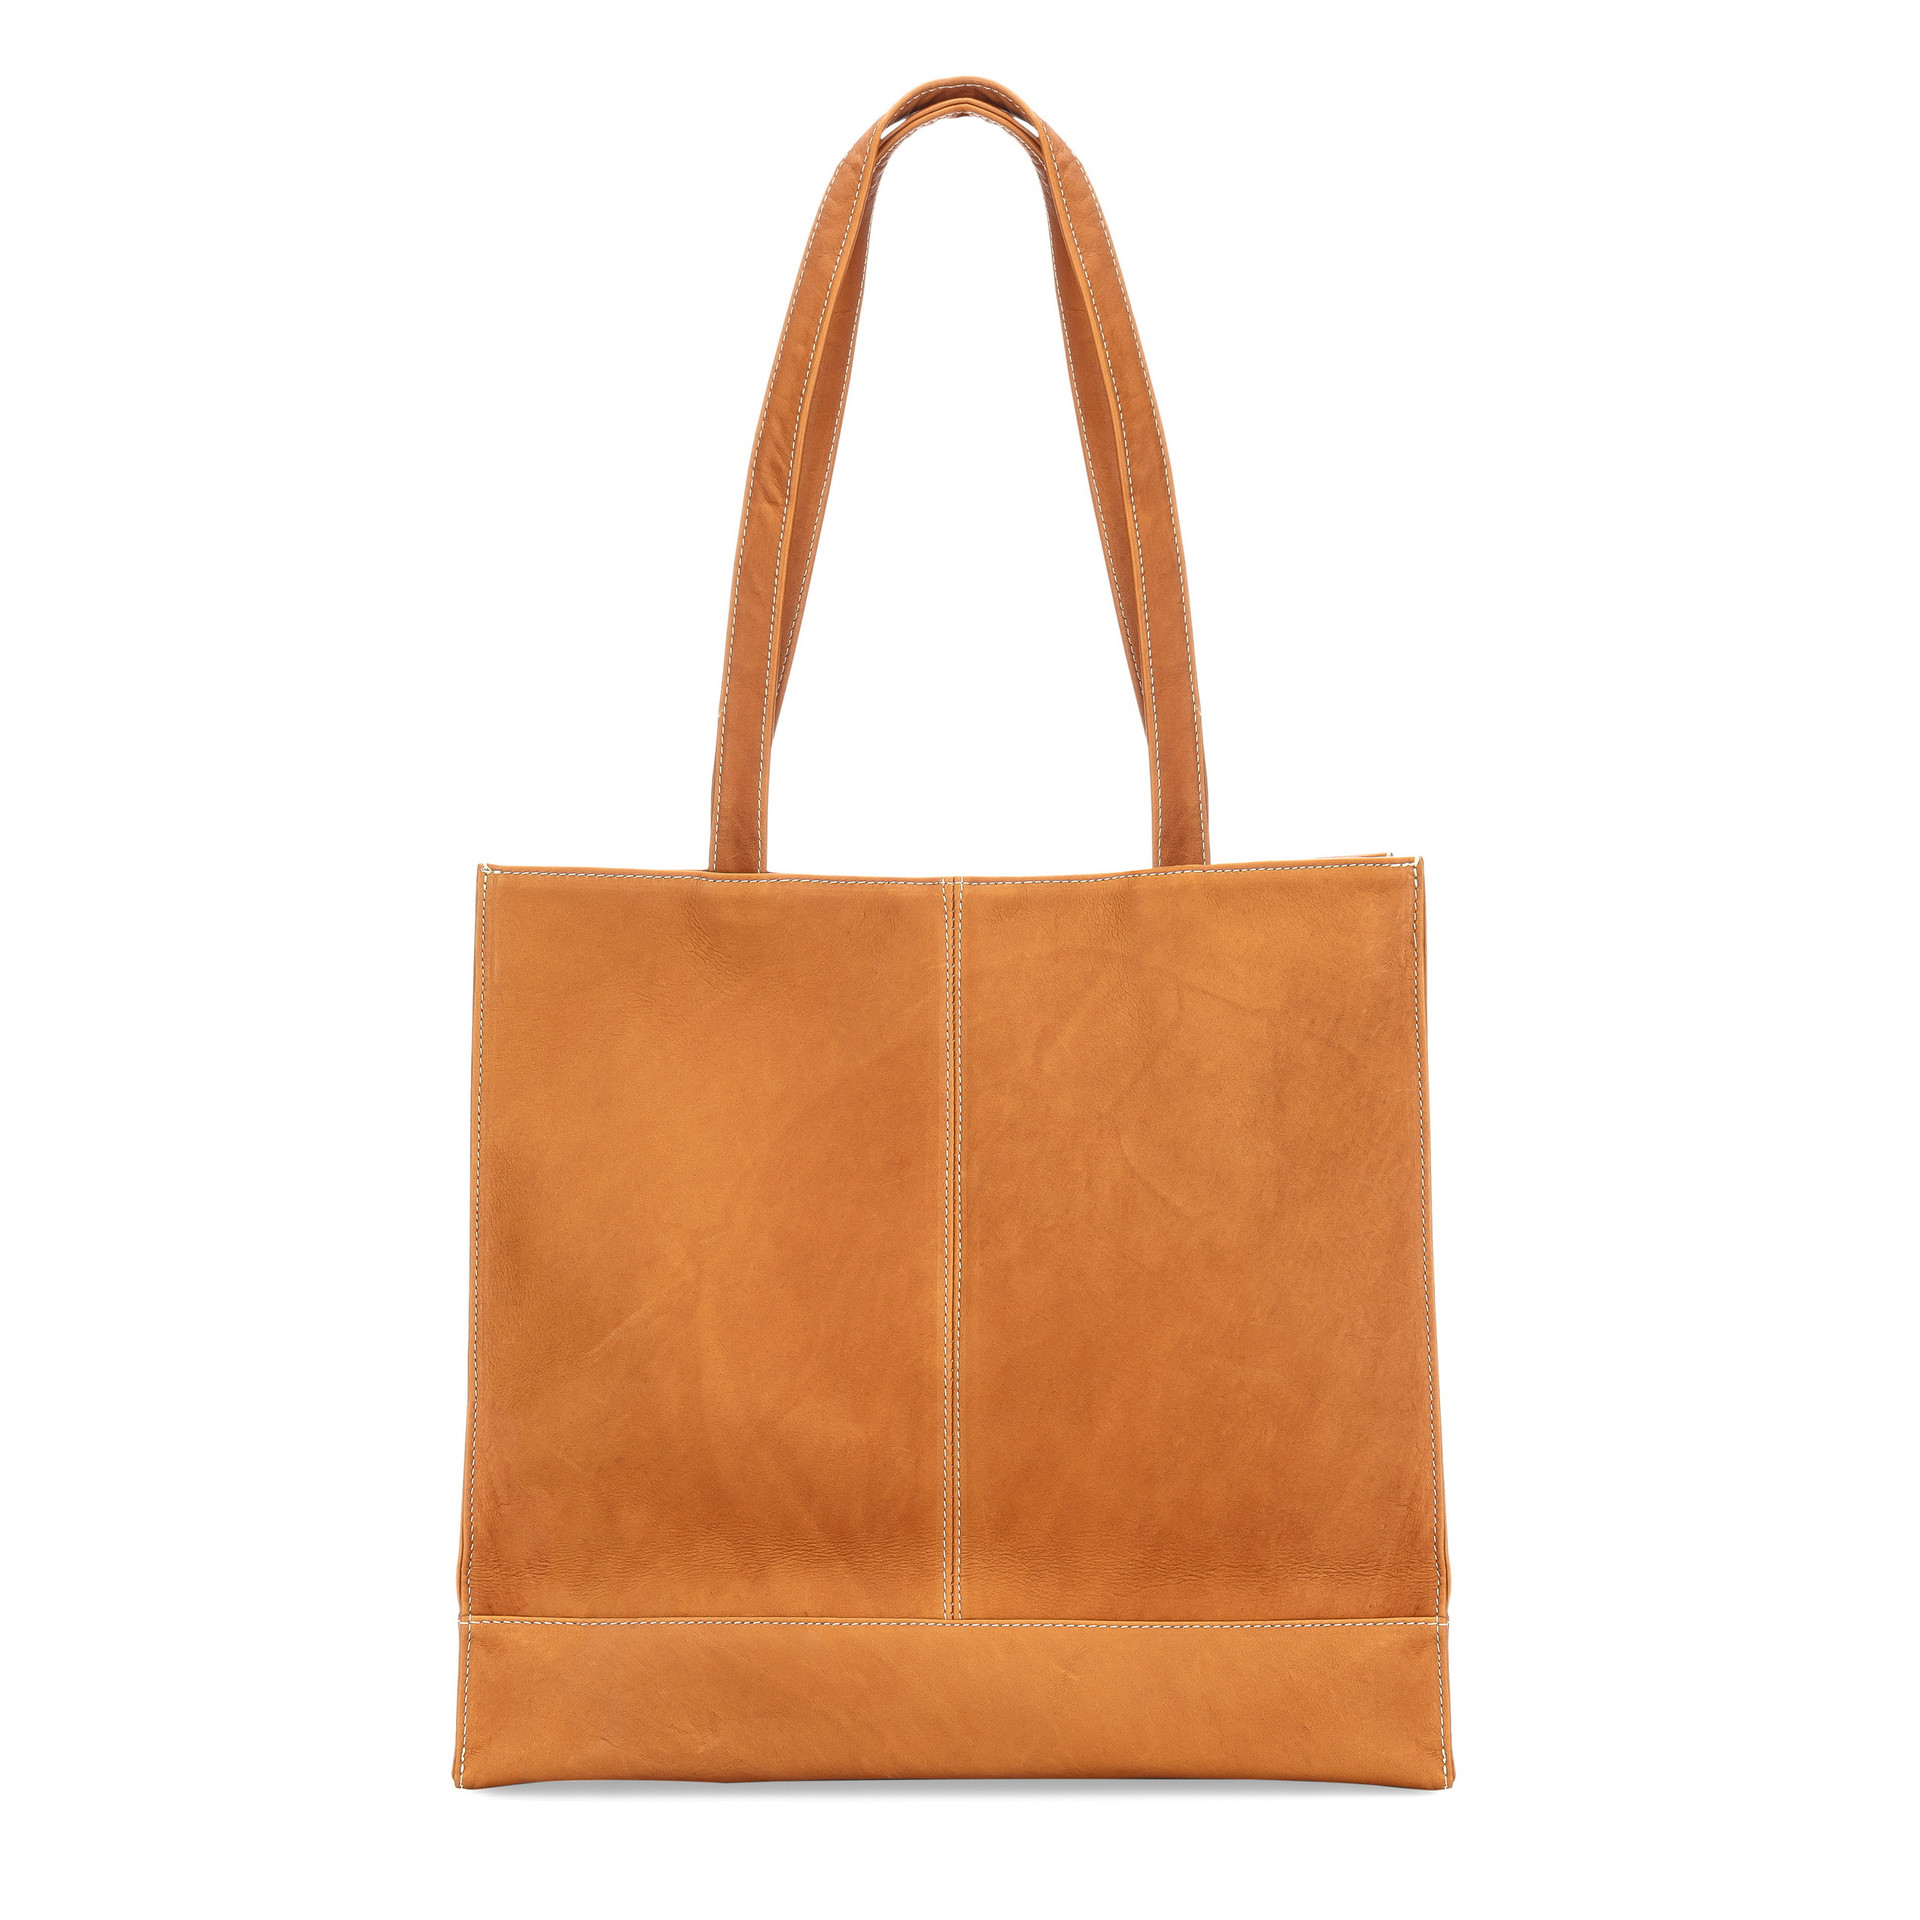 Everly Tote - Le Donne Leather Co.